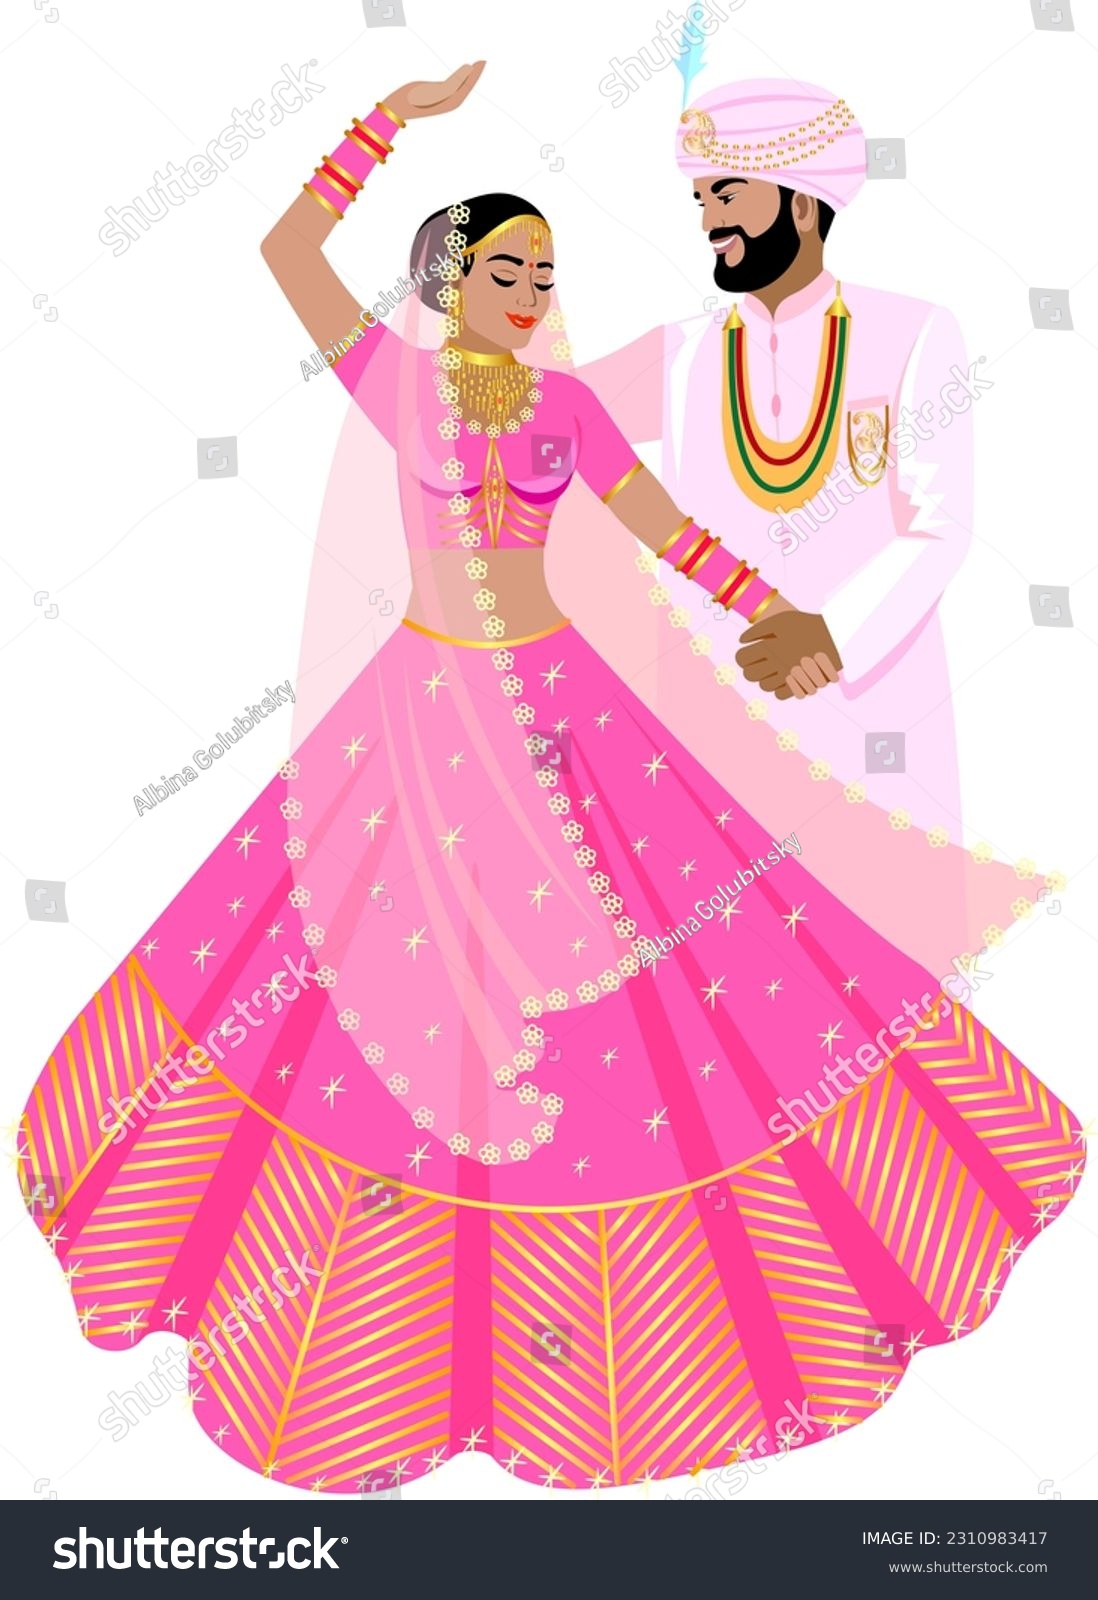 SVG of Beautiful Indian couple dancing wedding dance Bride in bright pink wedding dress Groom in light pink suit and turban Vector svg